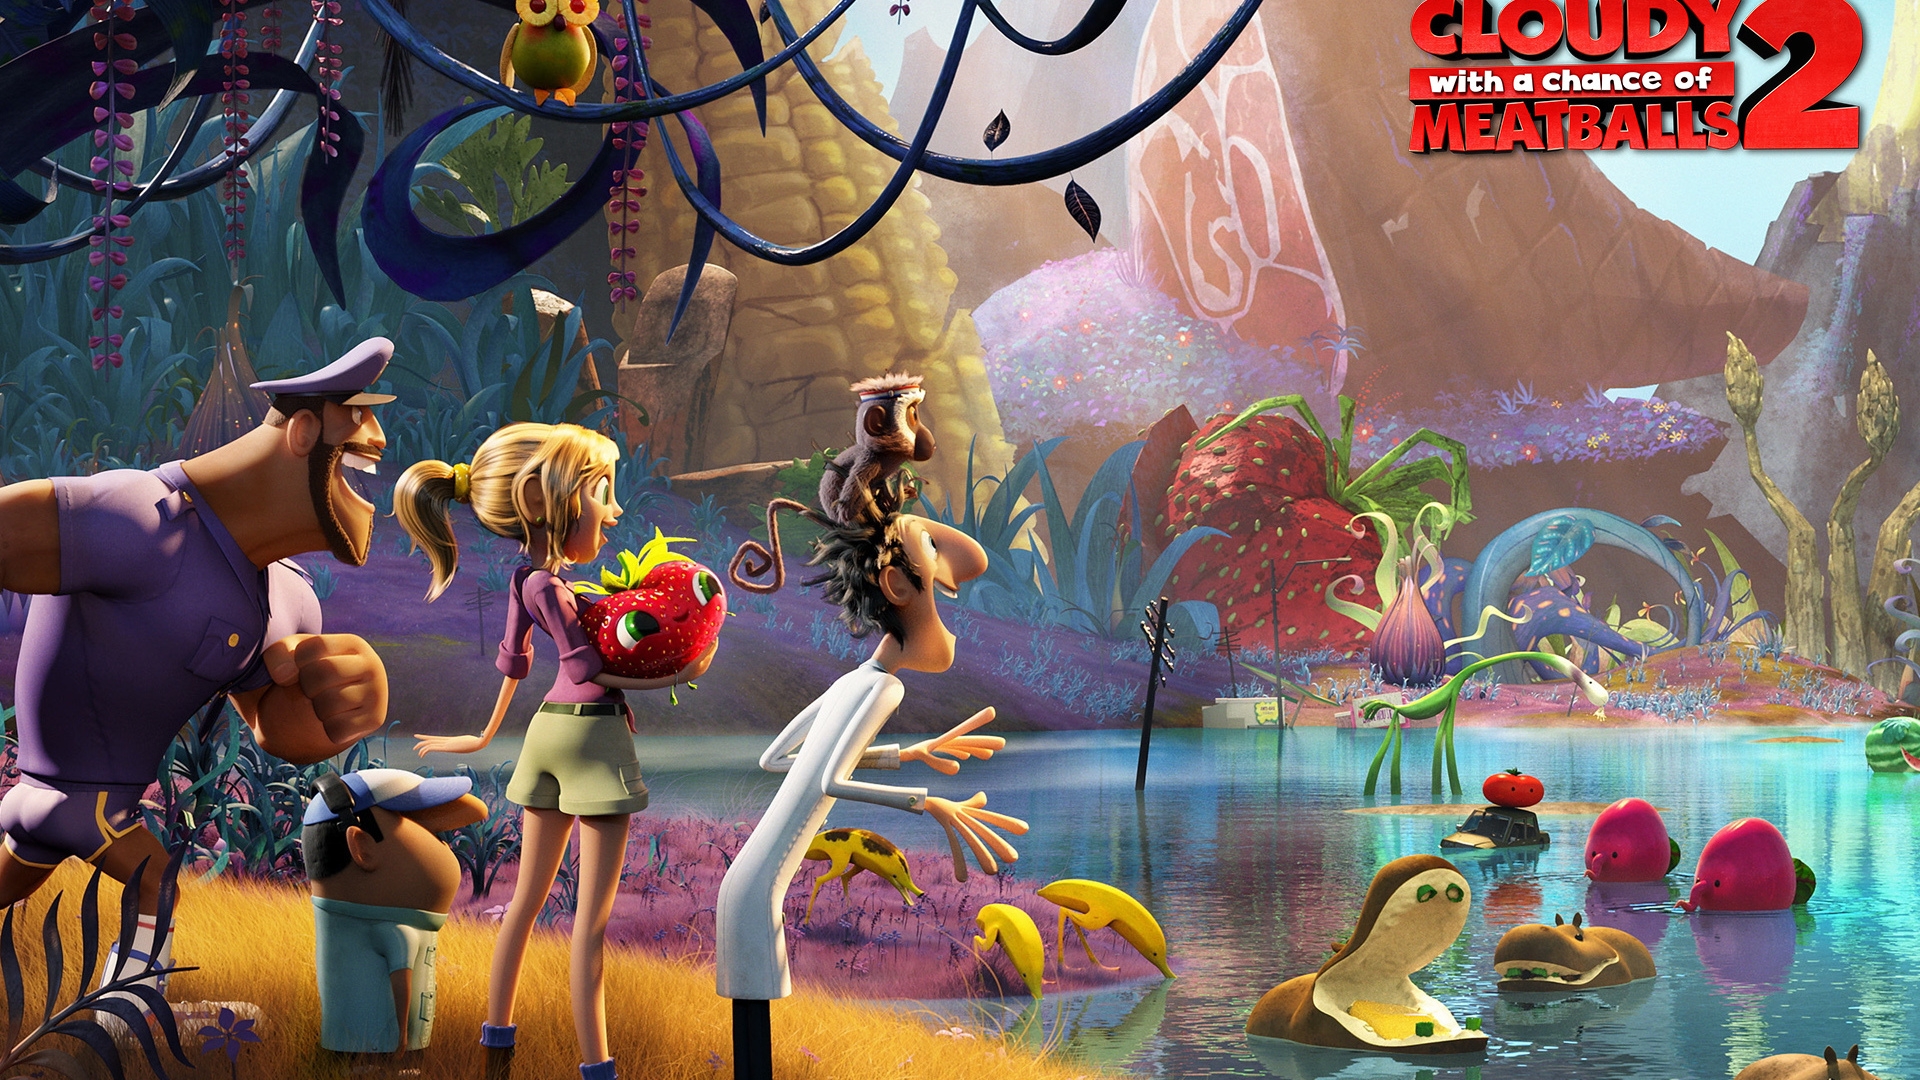 Cloudy with a Chance of Meatballs 2 for 1920 x 1080 HDTV 1080p resolution